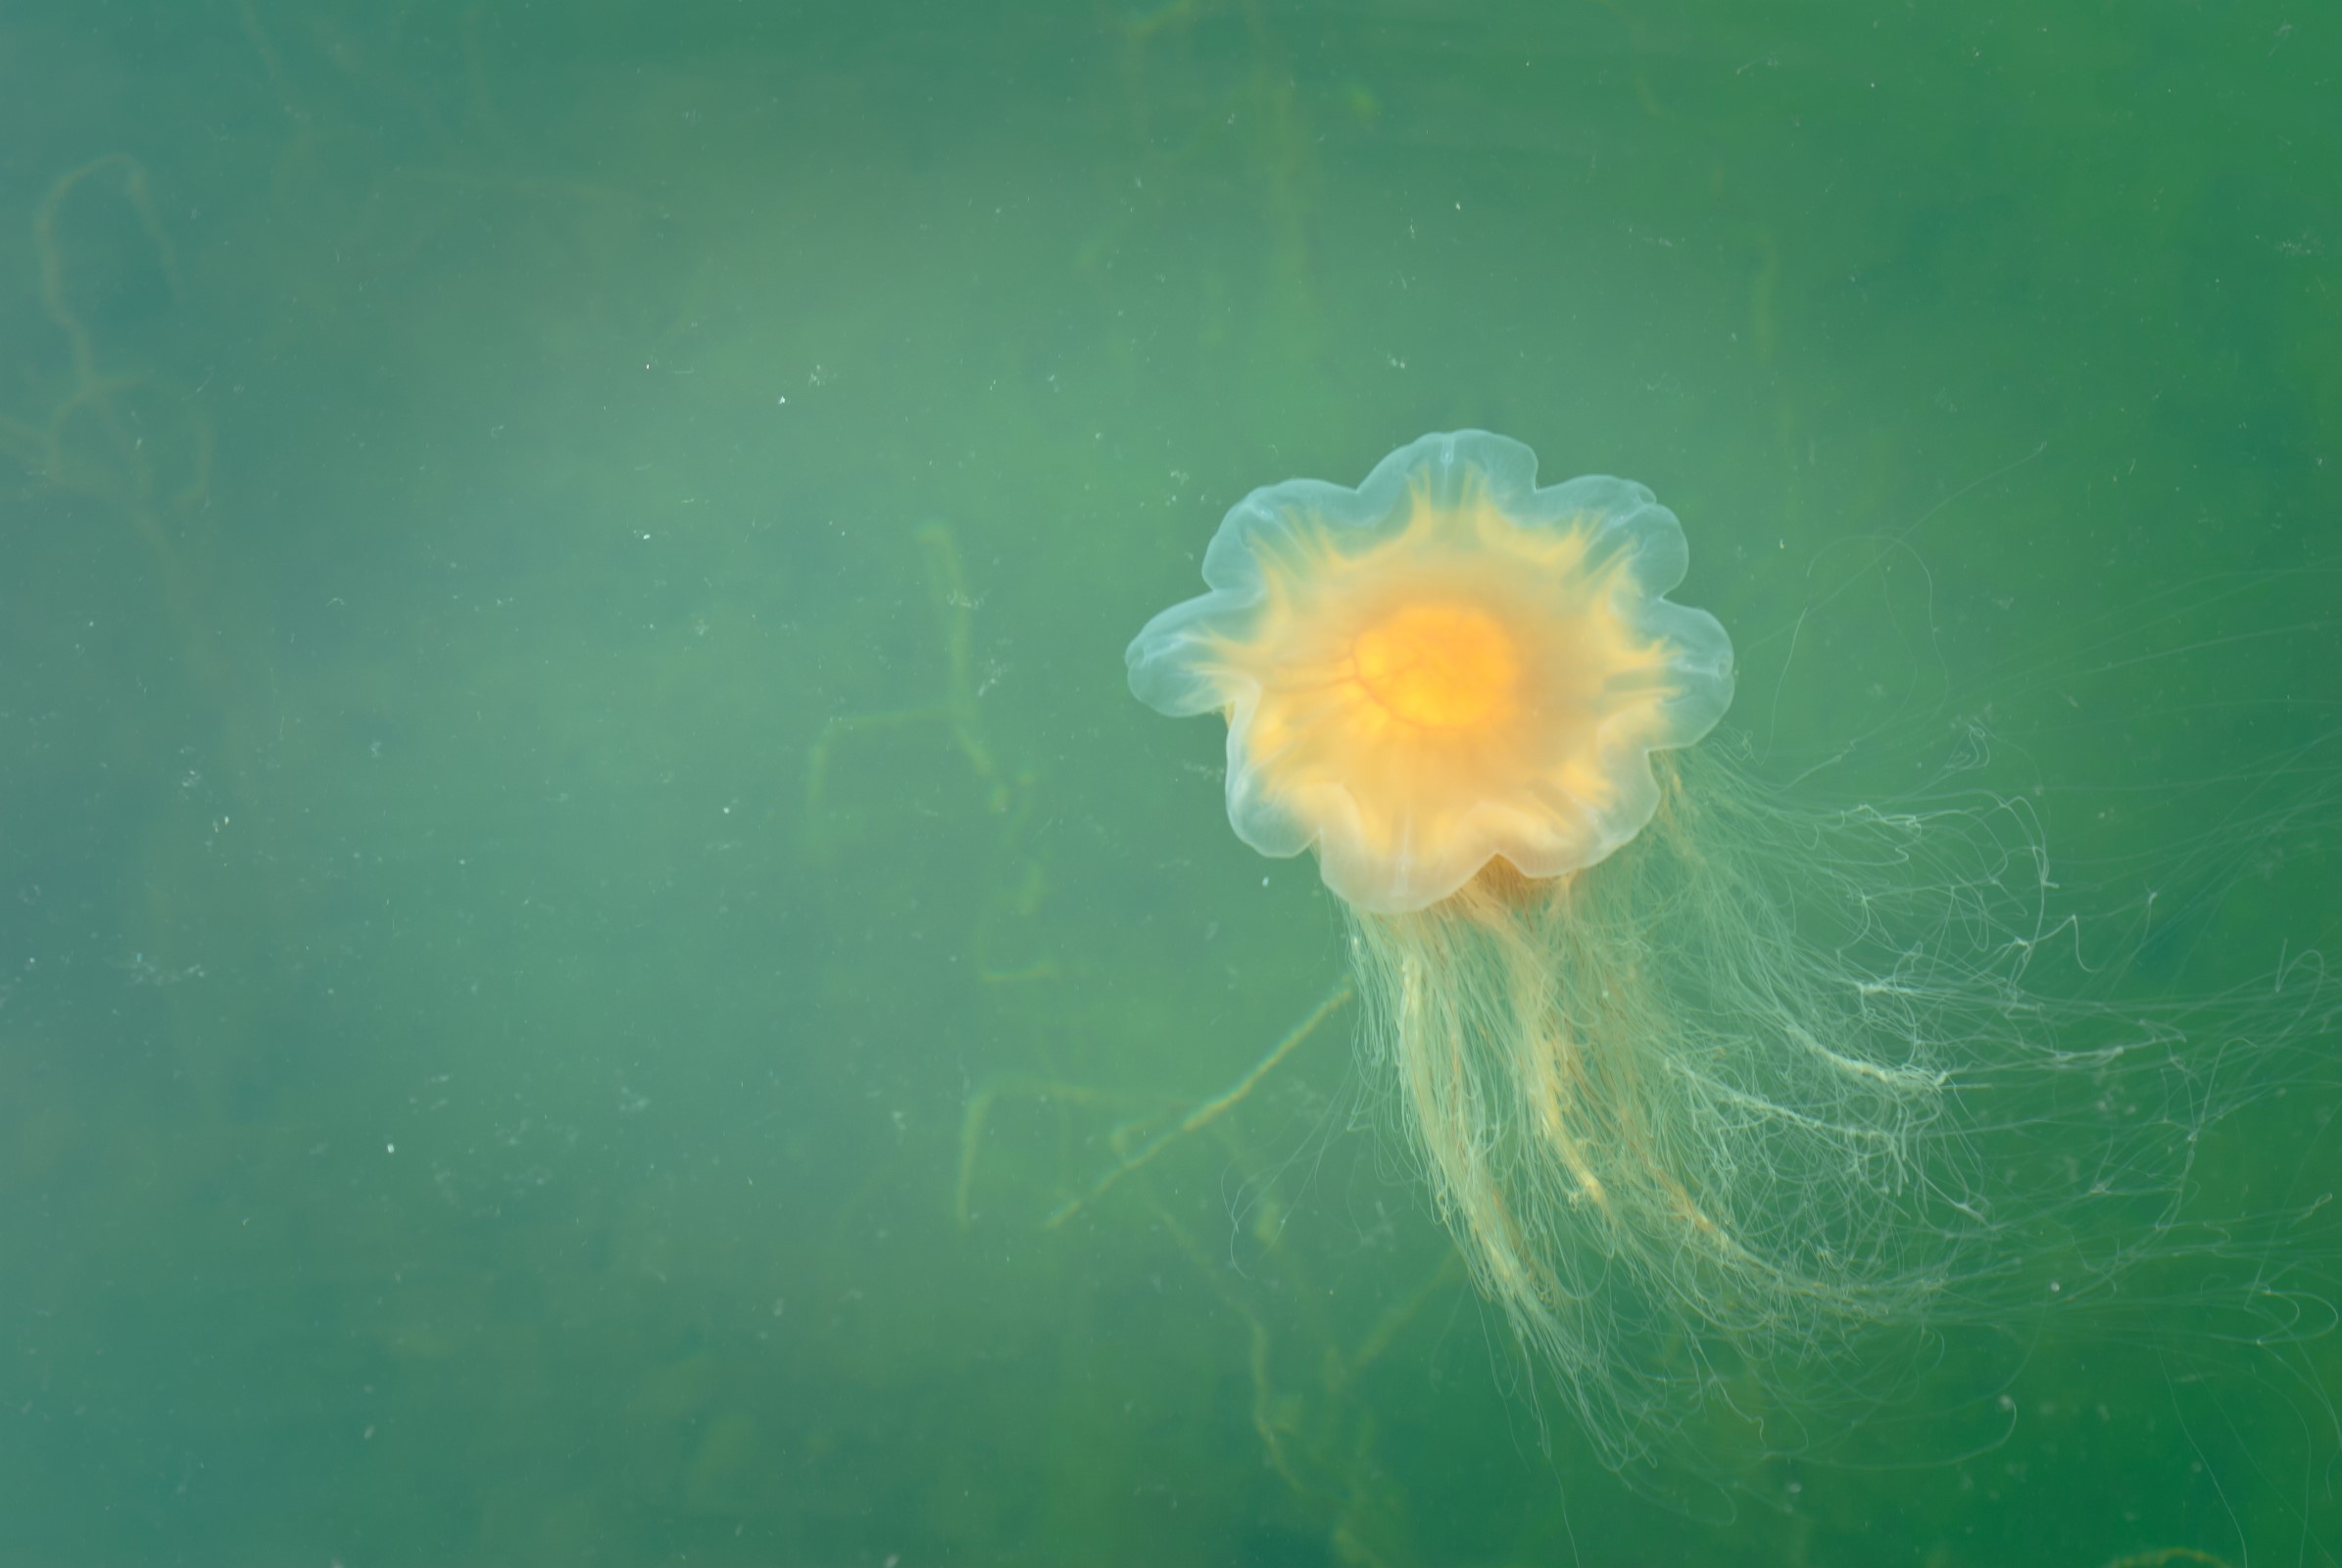 Jellyfish with a yellow color in the middle